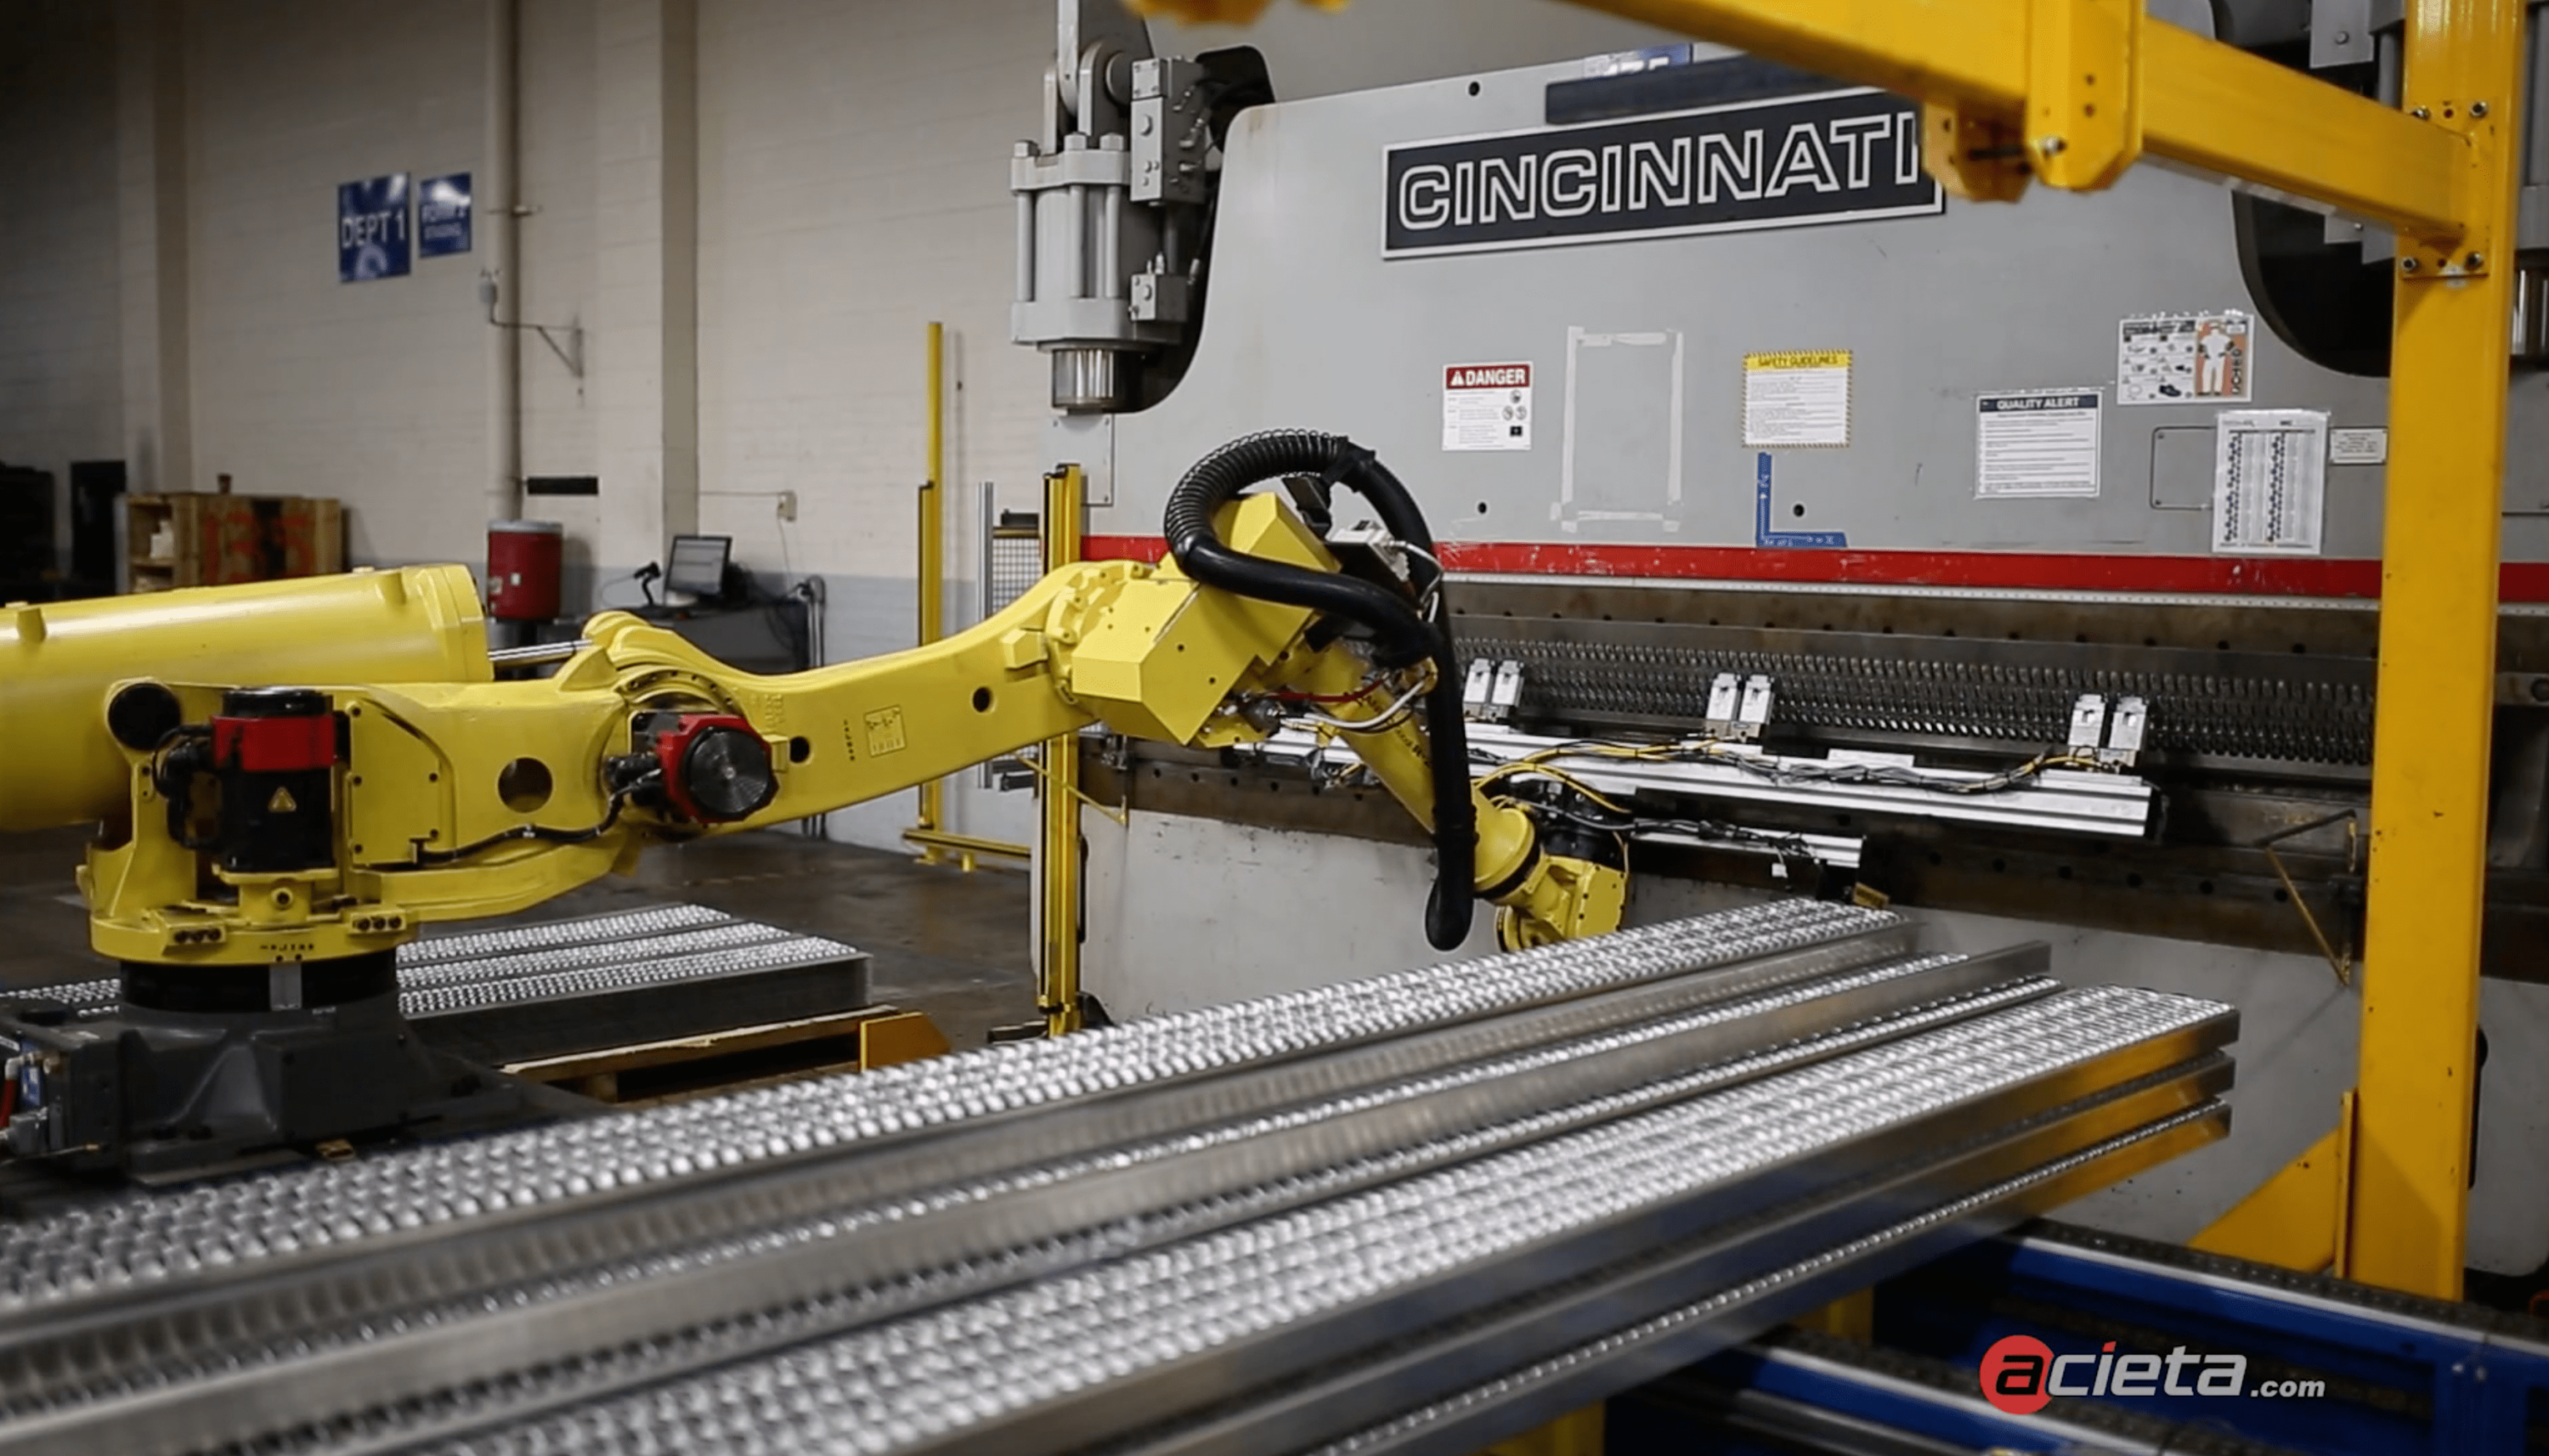 Automating Production: Robotics’ Impact on Manufacturing